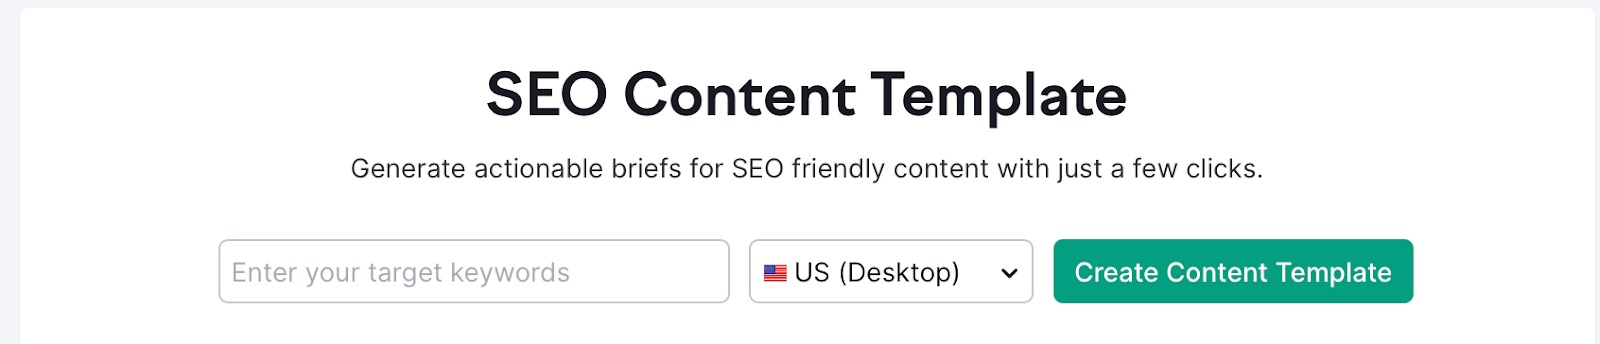 SEO Content Template tool. The dashboard showing where to enter your target keywords, select country, region, city, device type. 